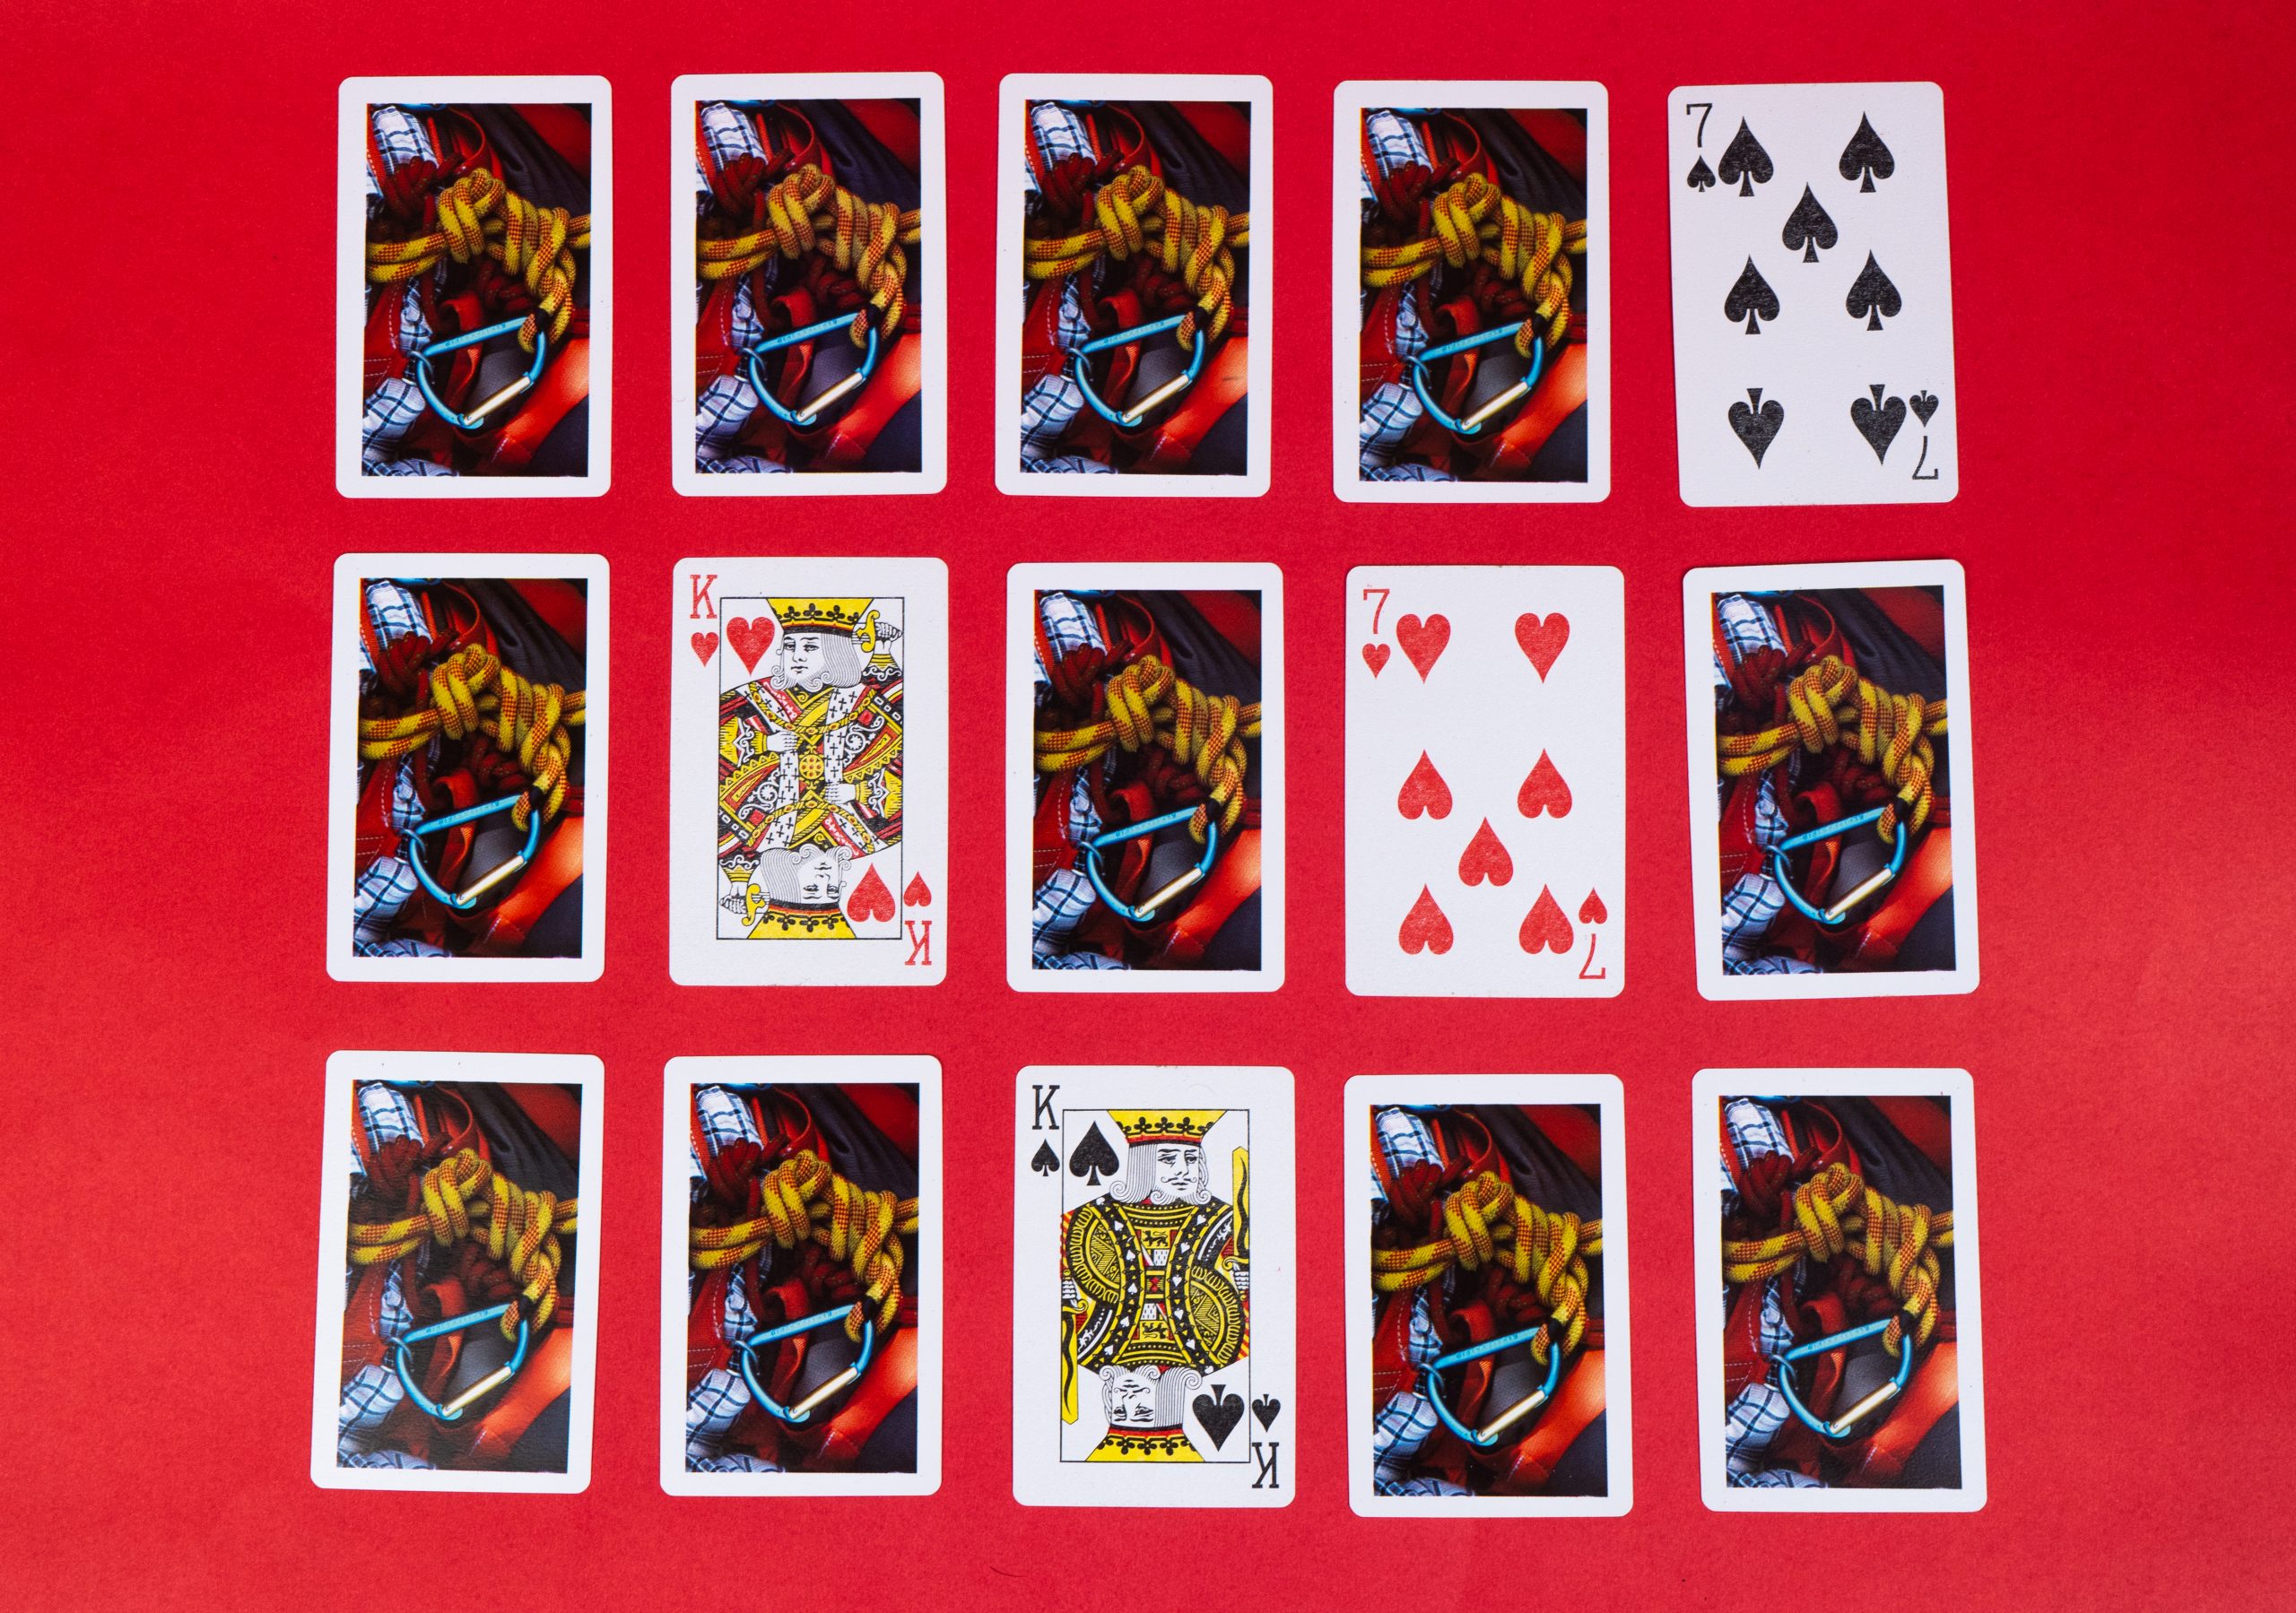 Playing cards in a pattern